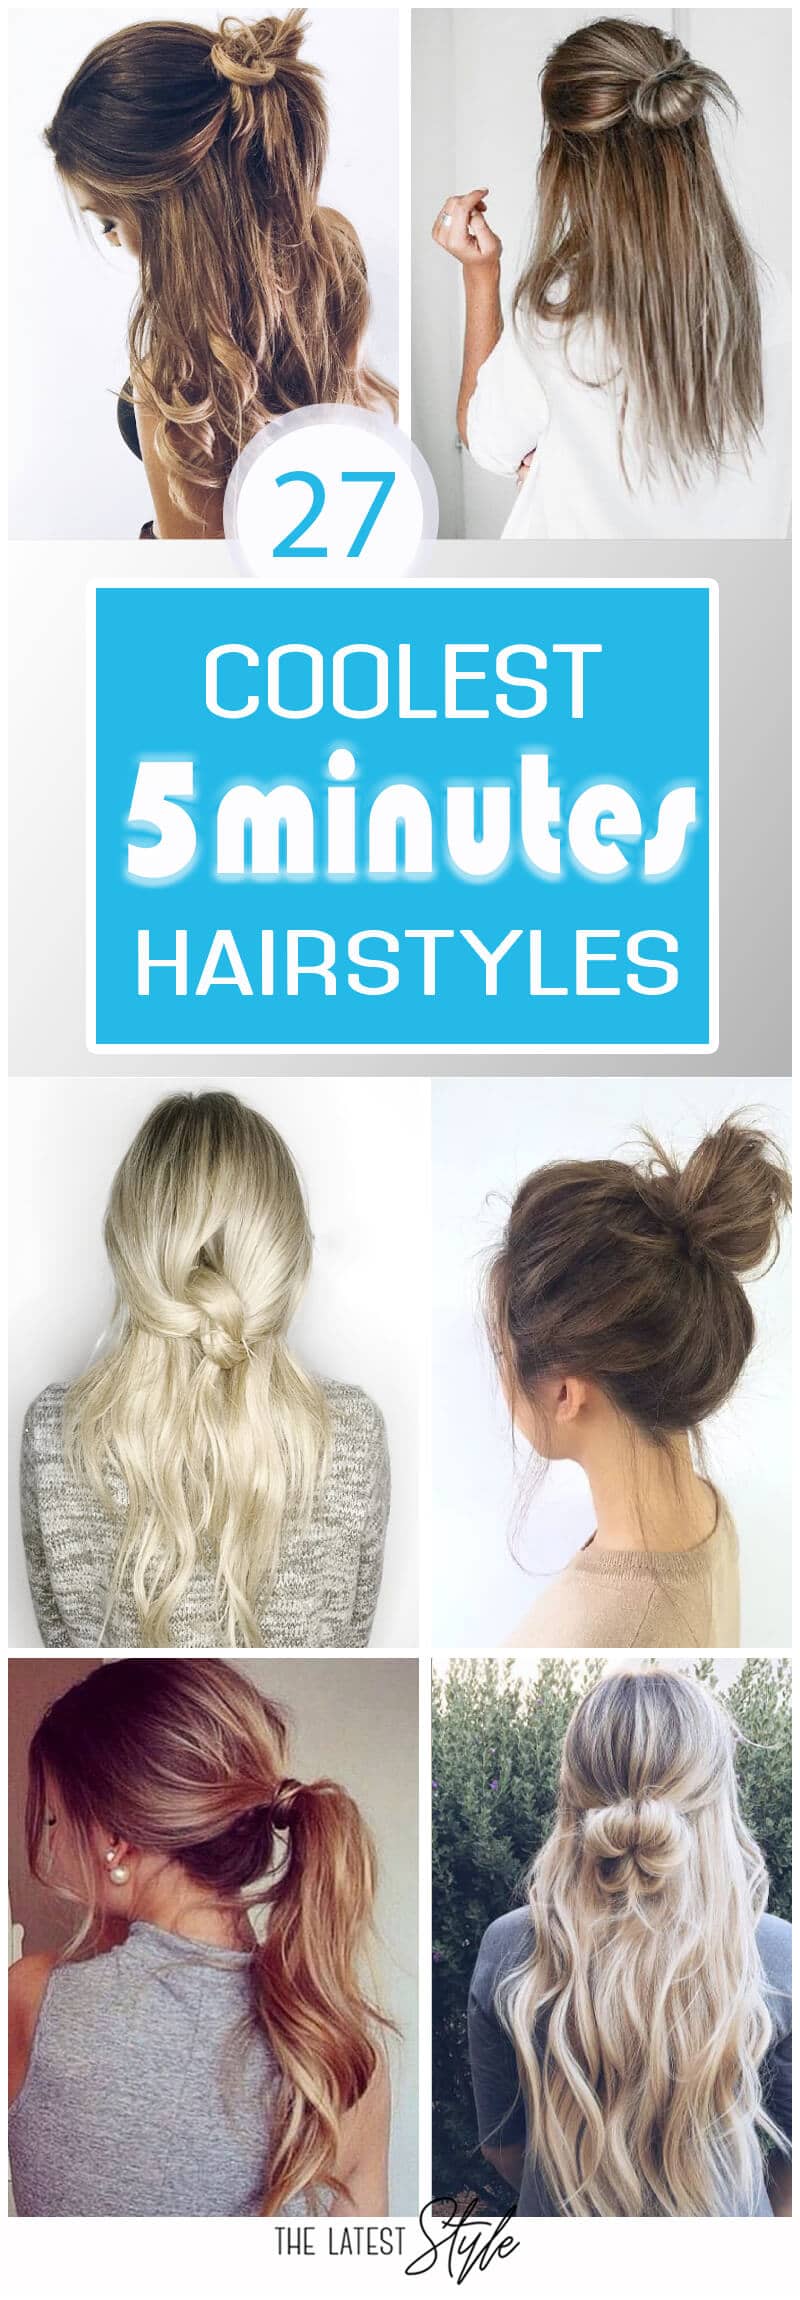 25 Five Minute Hairstyles to Keep You Sane in the Morning